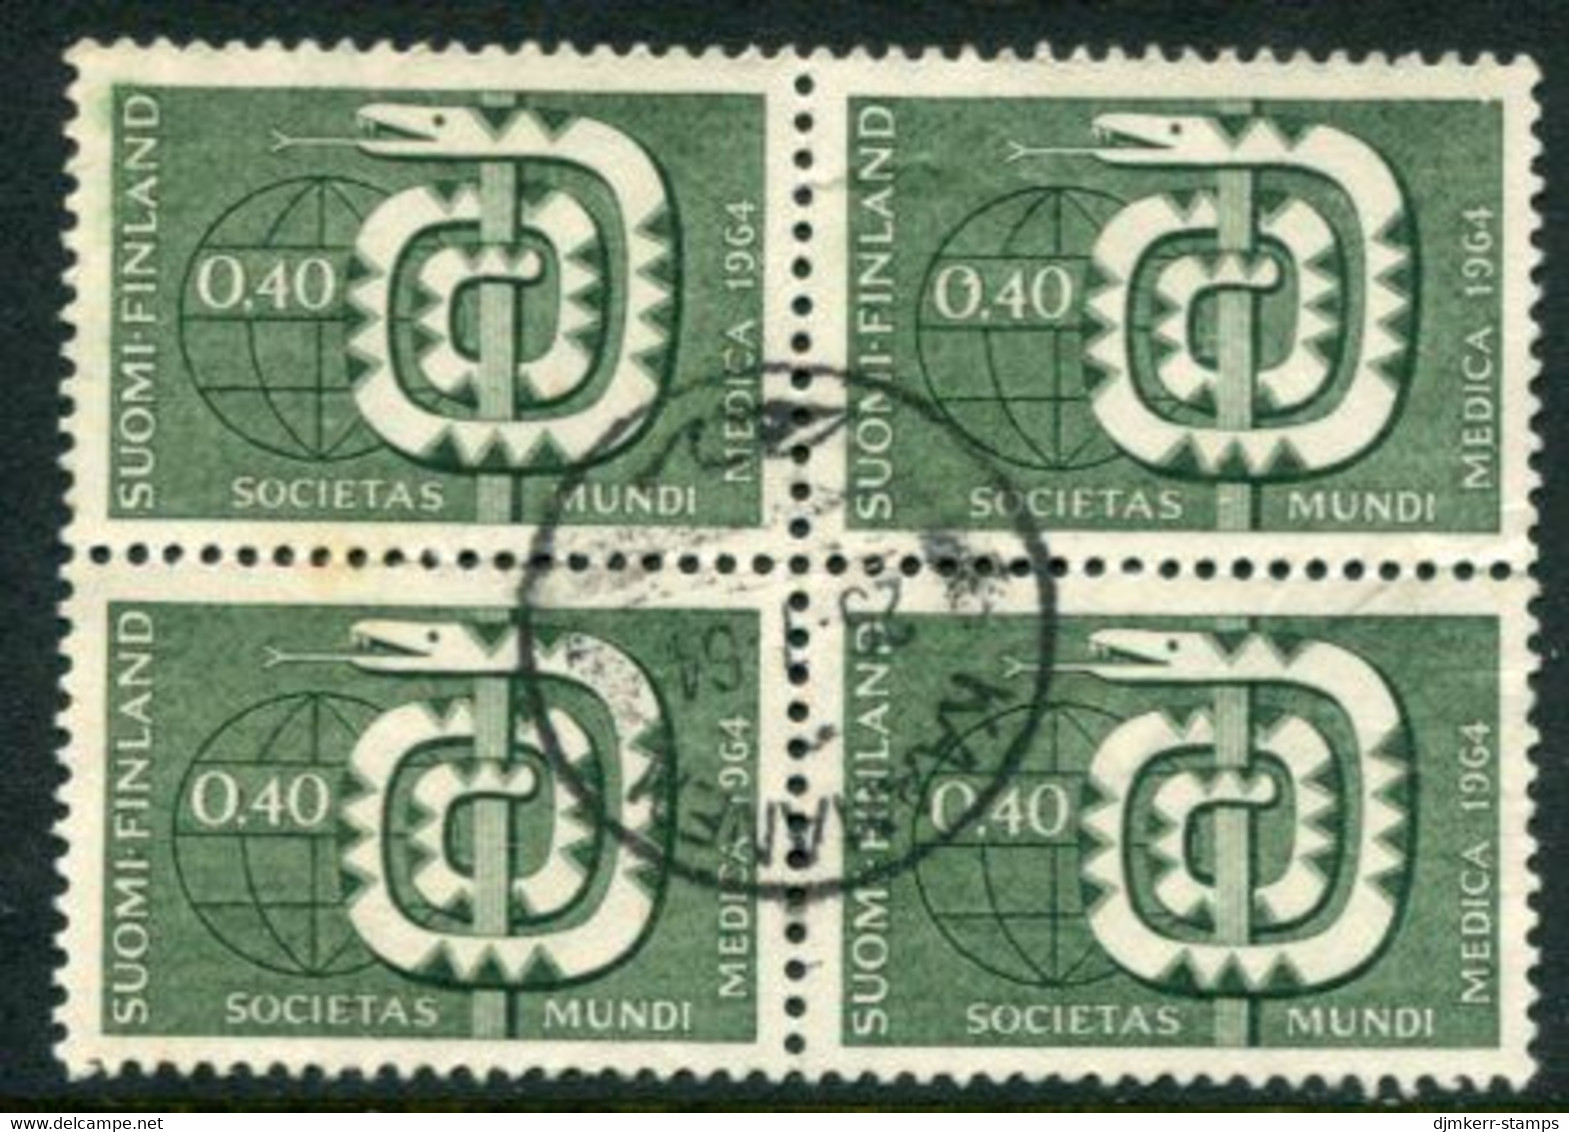 FINLAND 1964   Dentists' General Assembly Block Of 4 Used.  Michel 593 - Used Stamps